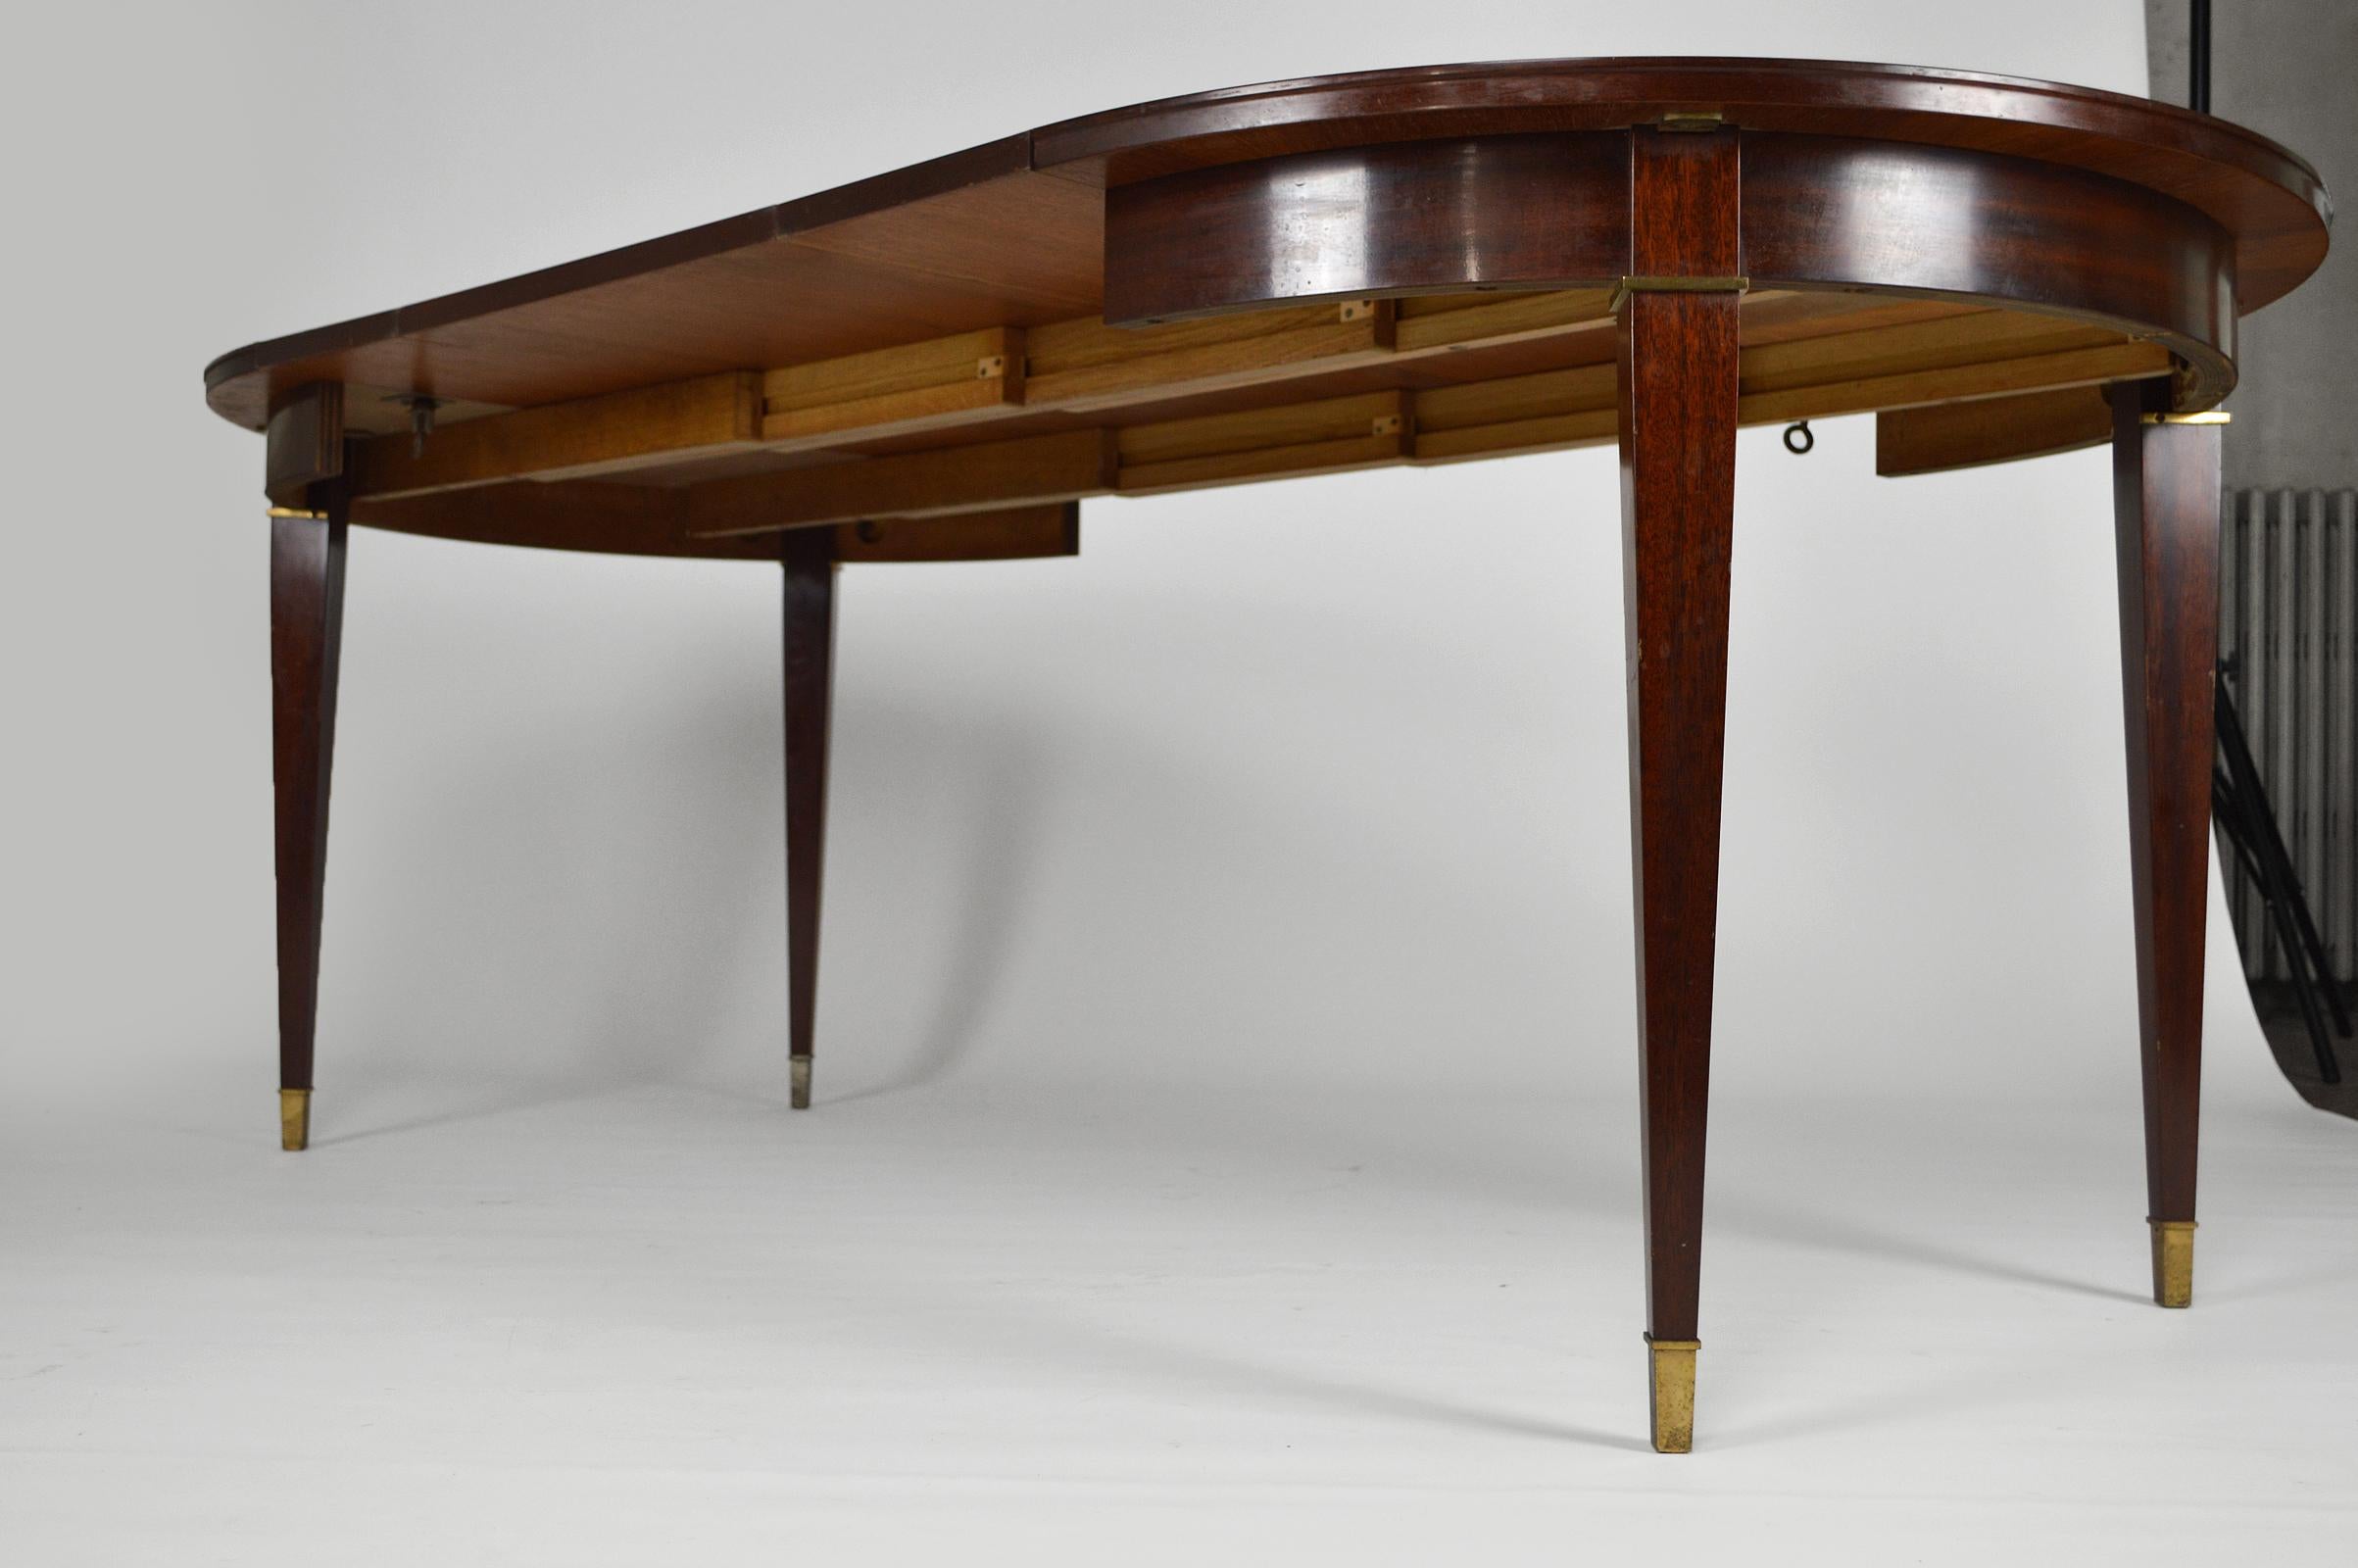 Art Deco Mahogany Round Table with Extensions, by Jacques Adnet, circa 1940 For Sale 11